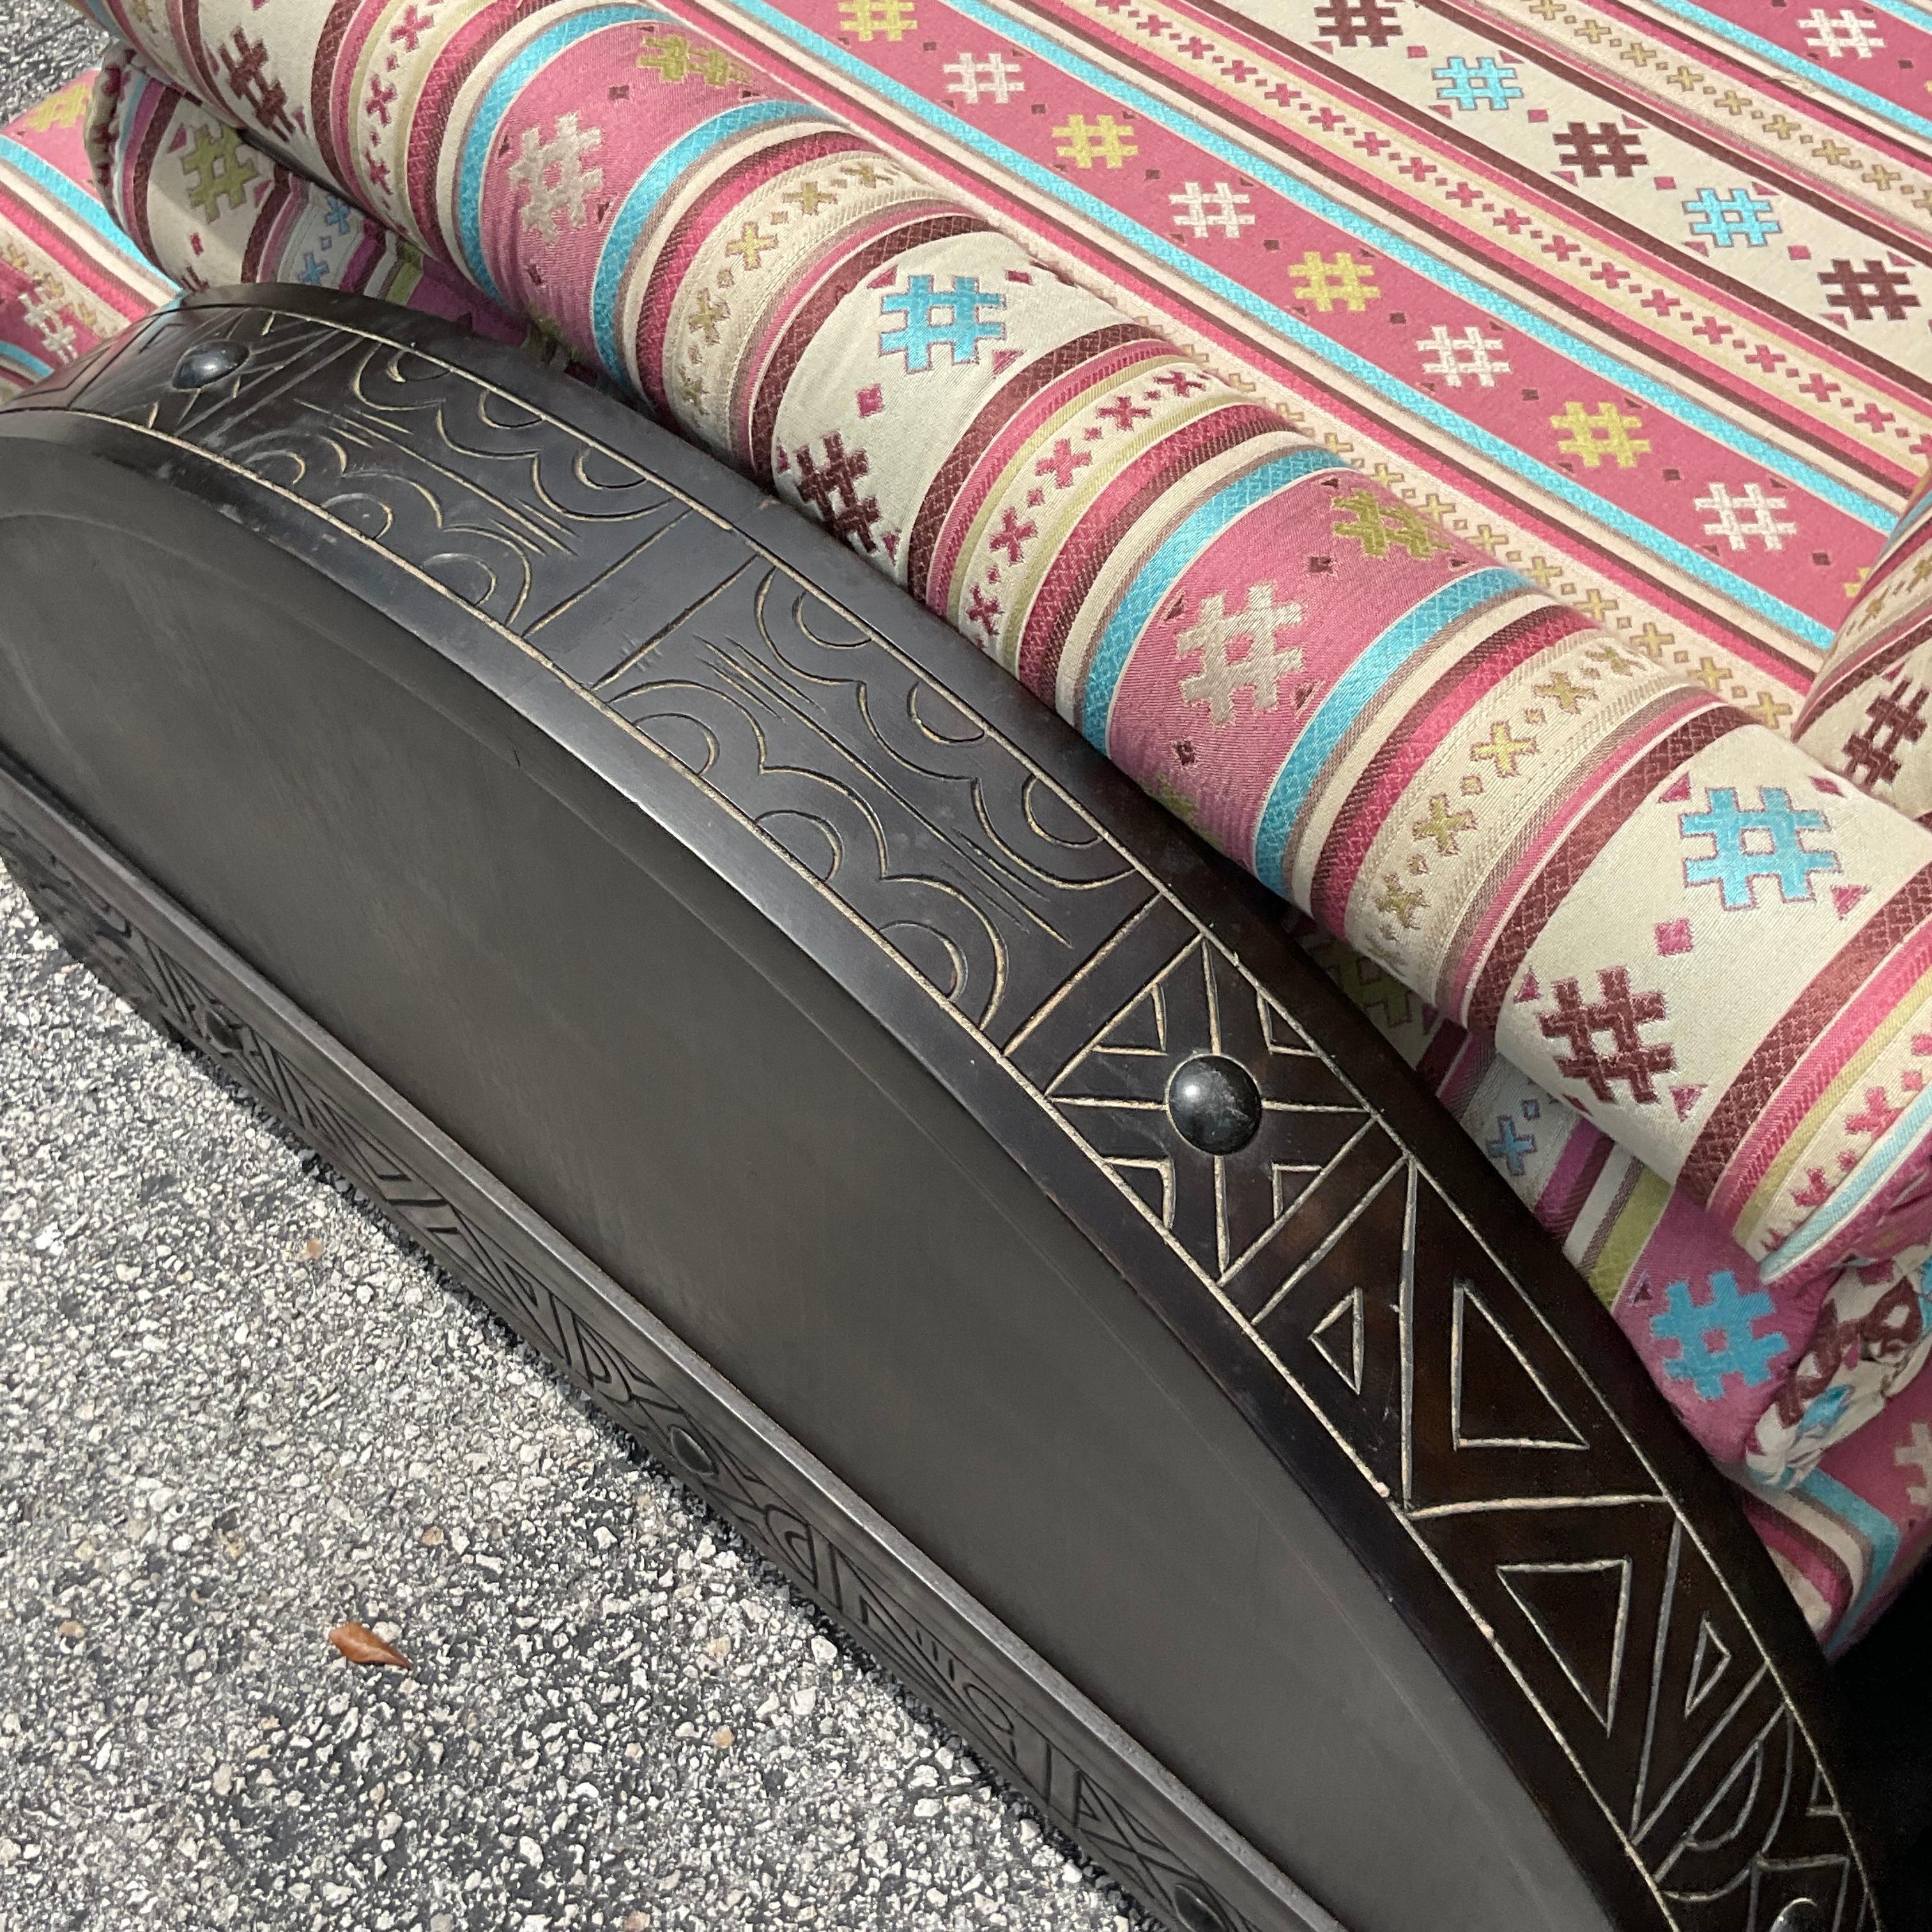 Metal Late 20th Century Vintage Boho Moroccan Sofas - a Pair For Sale